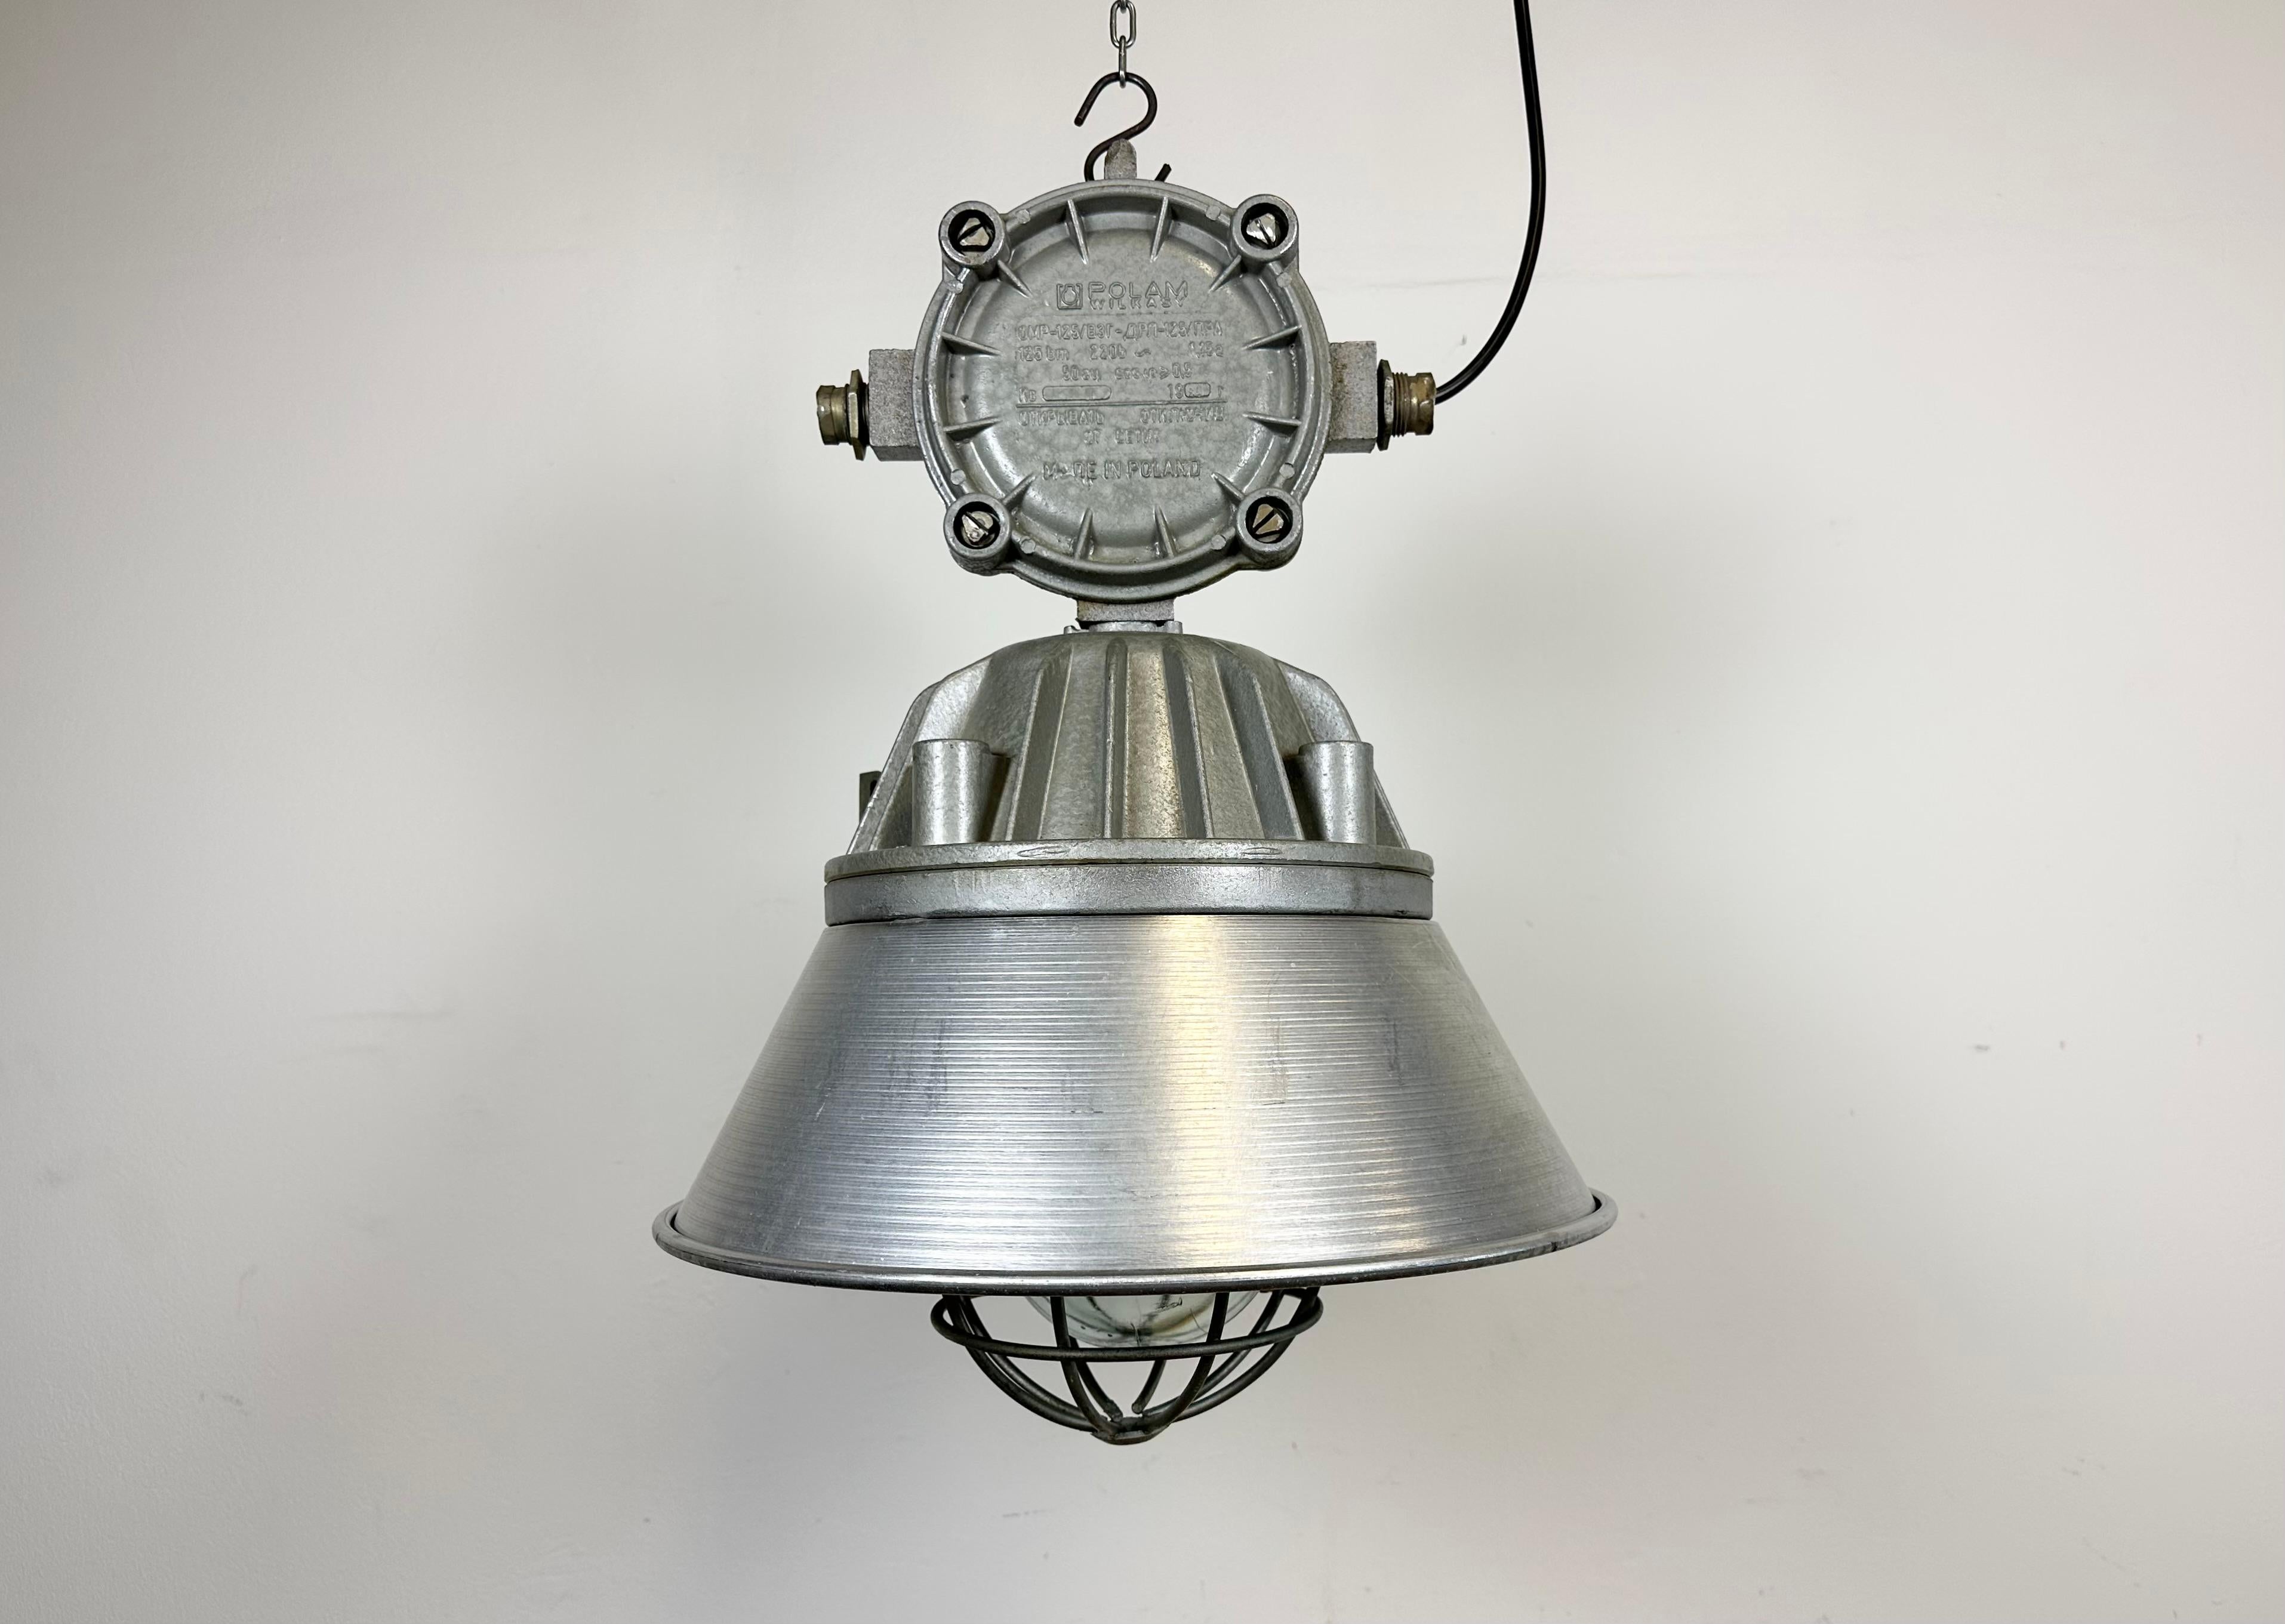 Large industrial factory hanging lamp made by Polam Wilkasy in Poland during the 1970s. It features a cast aluminium body, an aluminium shade,a clear glass cover and iron grid. The porcelain socket requires E 27/ E26 lightbulbs. New wire. The weight